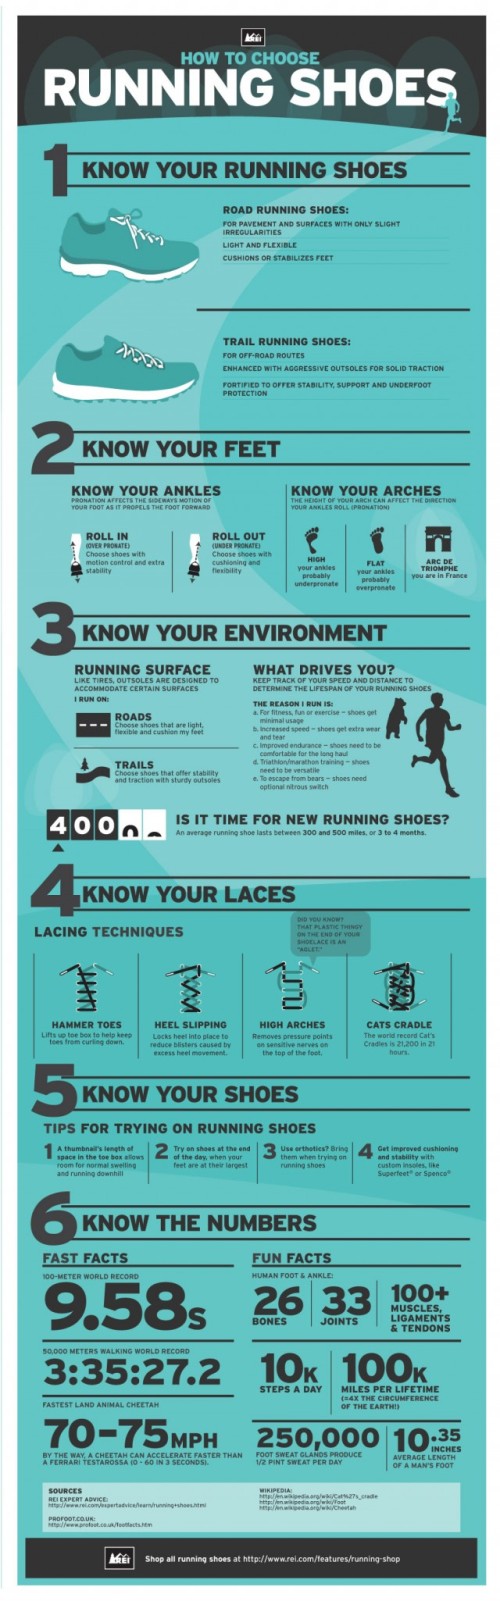 Running shoes infographic